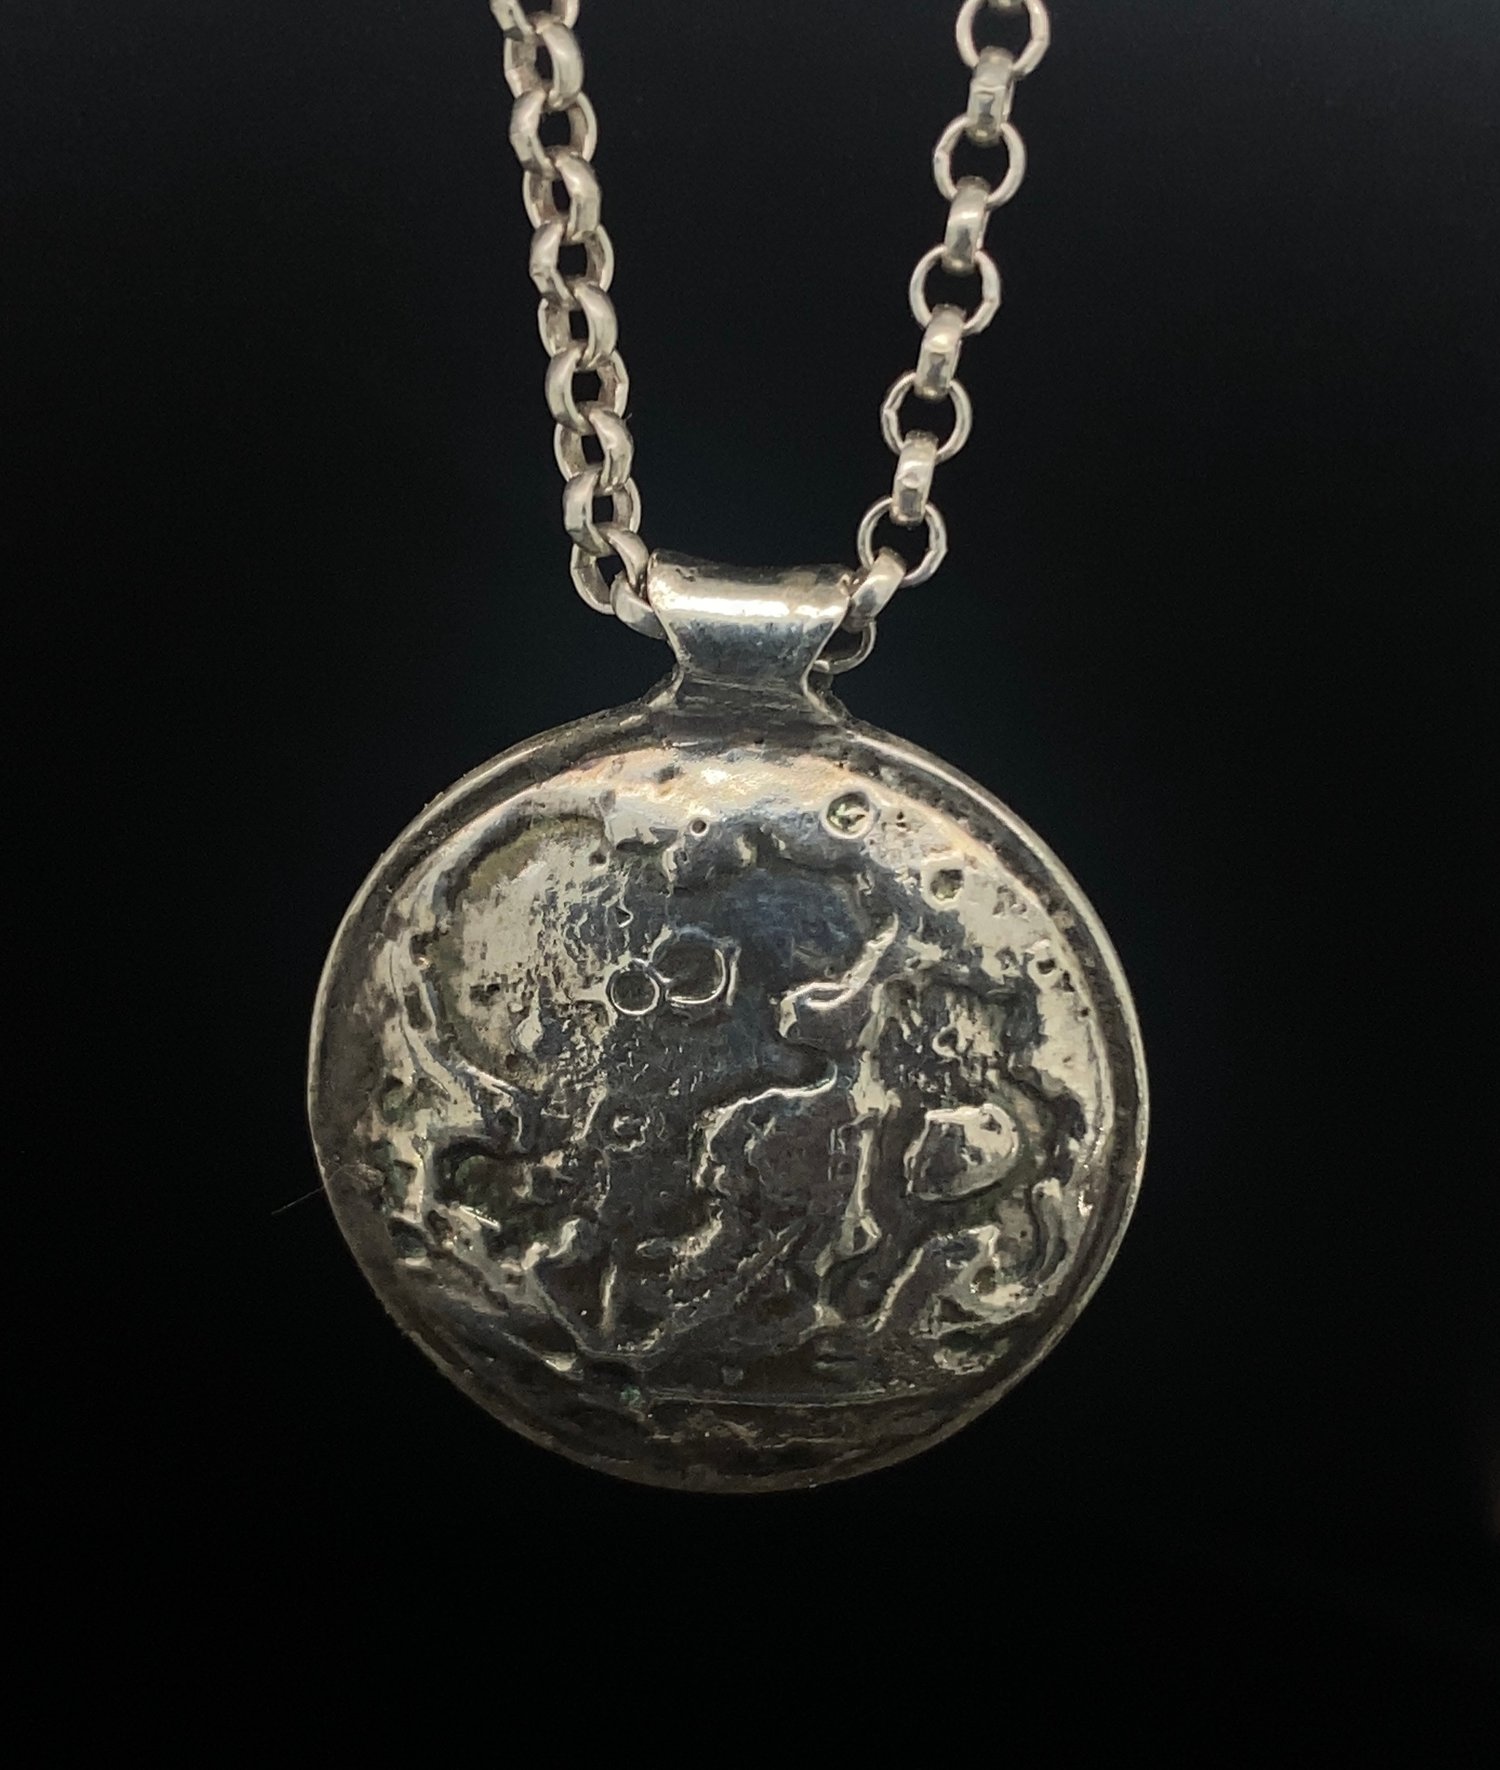 Image of Moon crater pendants